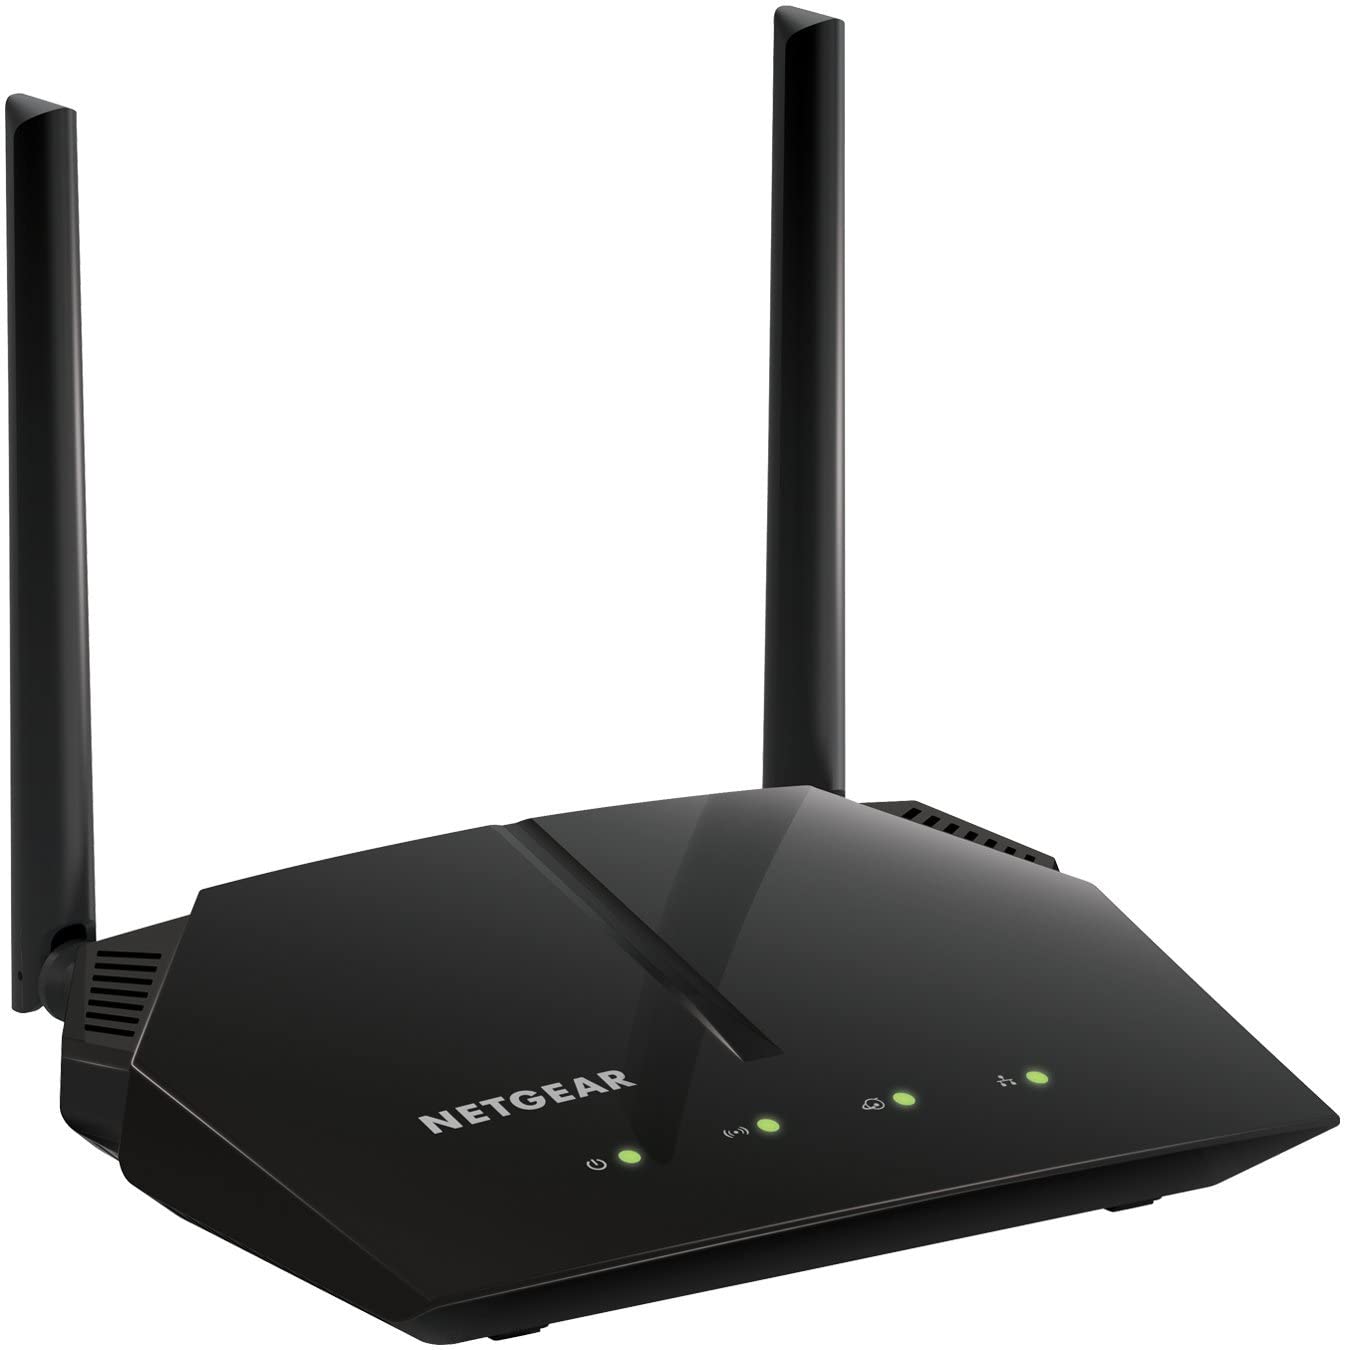 NETGEAR R6080 Dual Band WiFi Router, 1000 Mbps